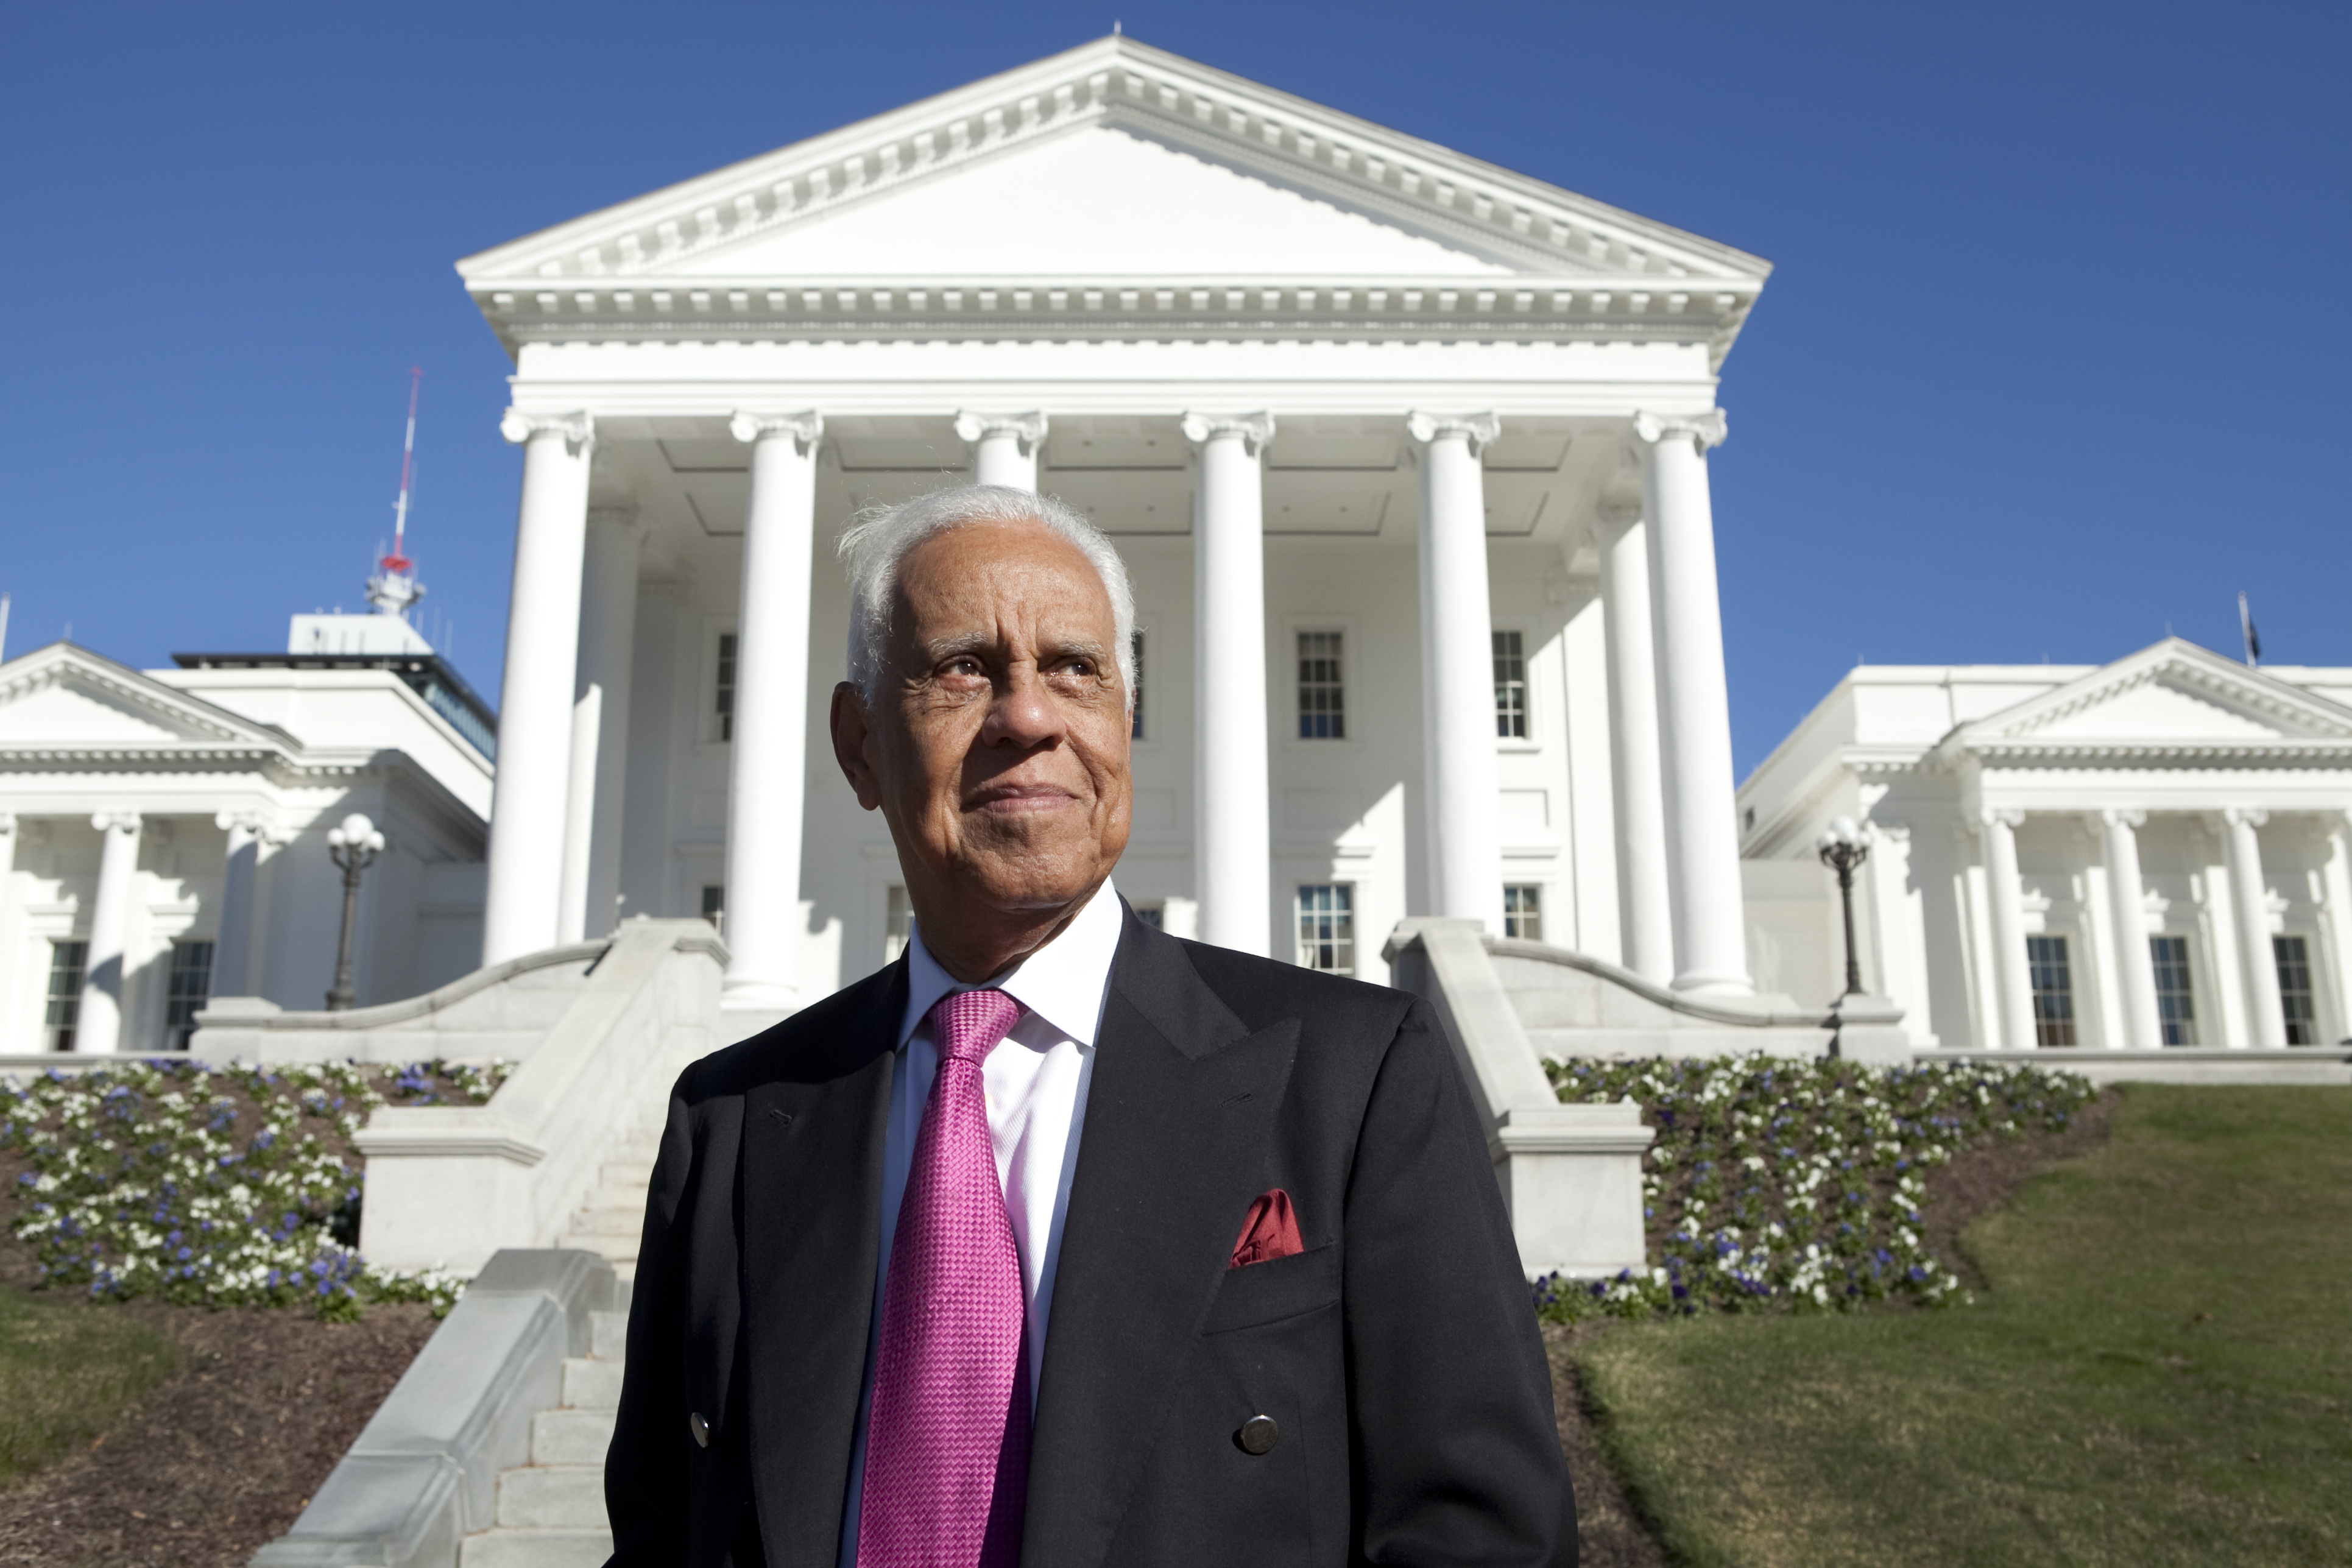 L. Douglas Wilder, the 66th Governor of Virginia and a Distinguished Professor was the featured guest of the Wilder School’s Lunch and Learn Zoom presentation on May 19.